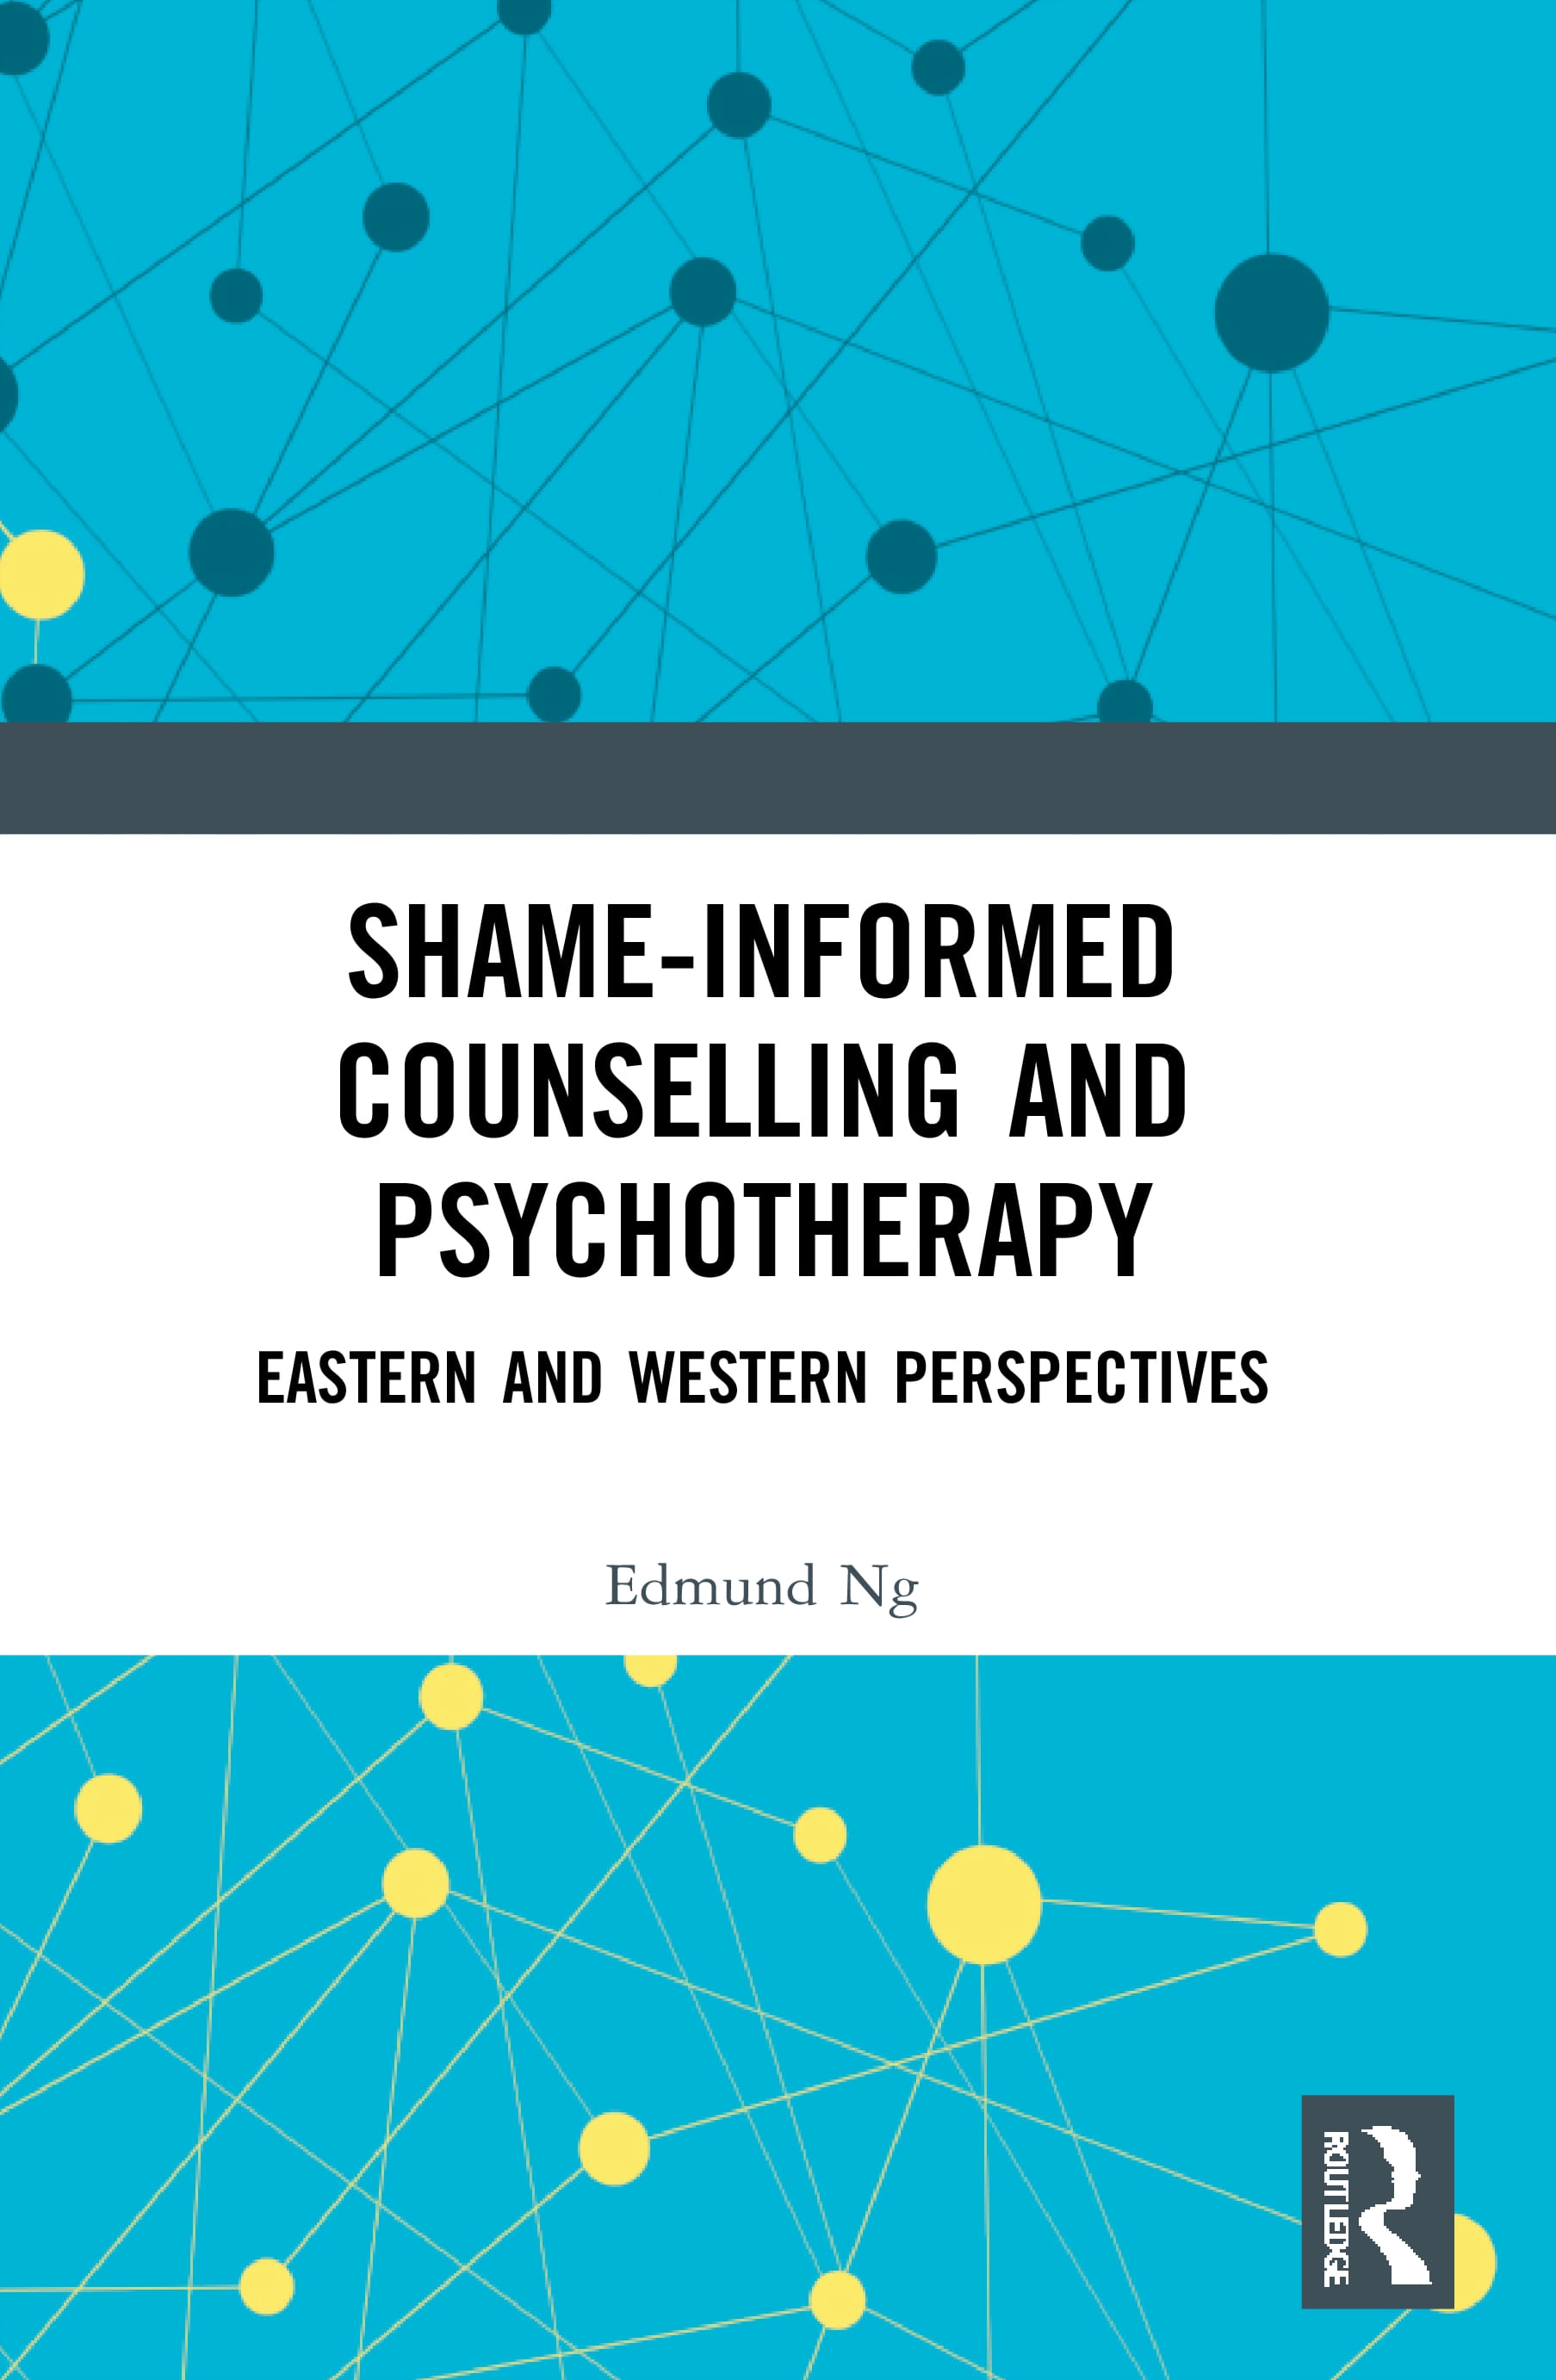 Shame-Informed Counselling and Psychotherapy: Eastern and Western Perspectives